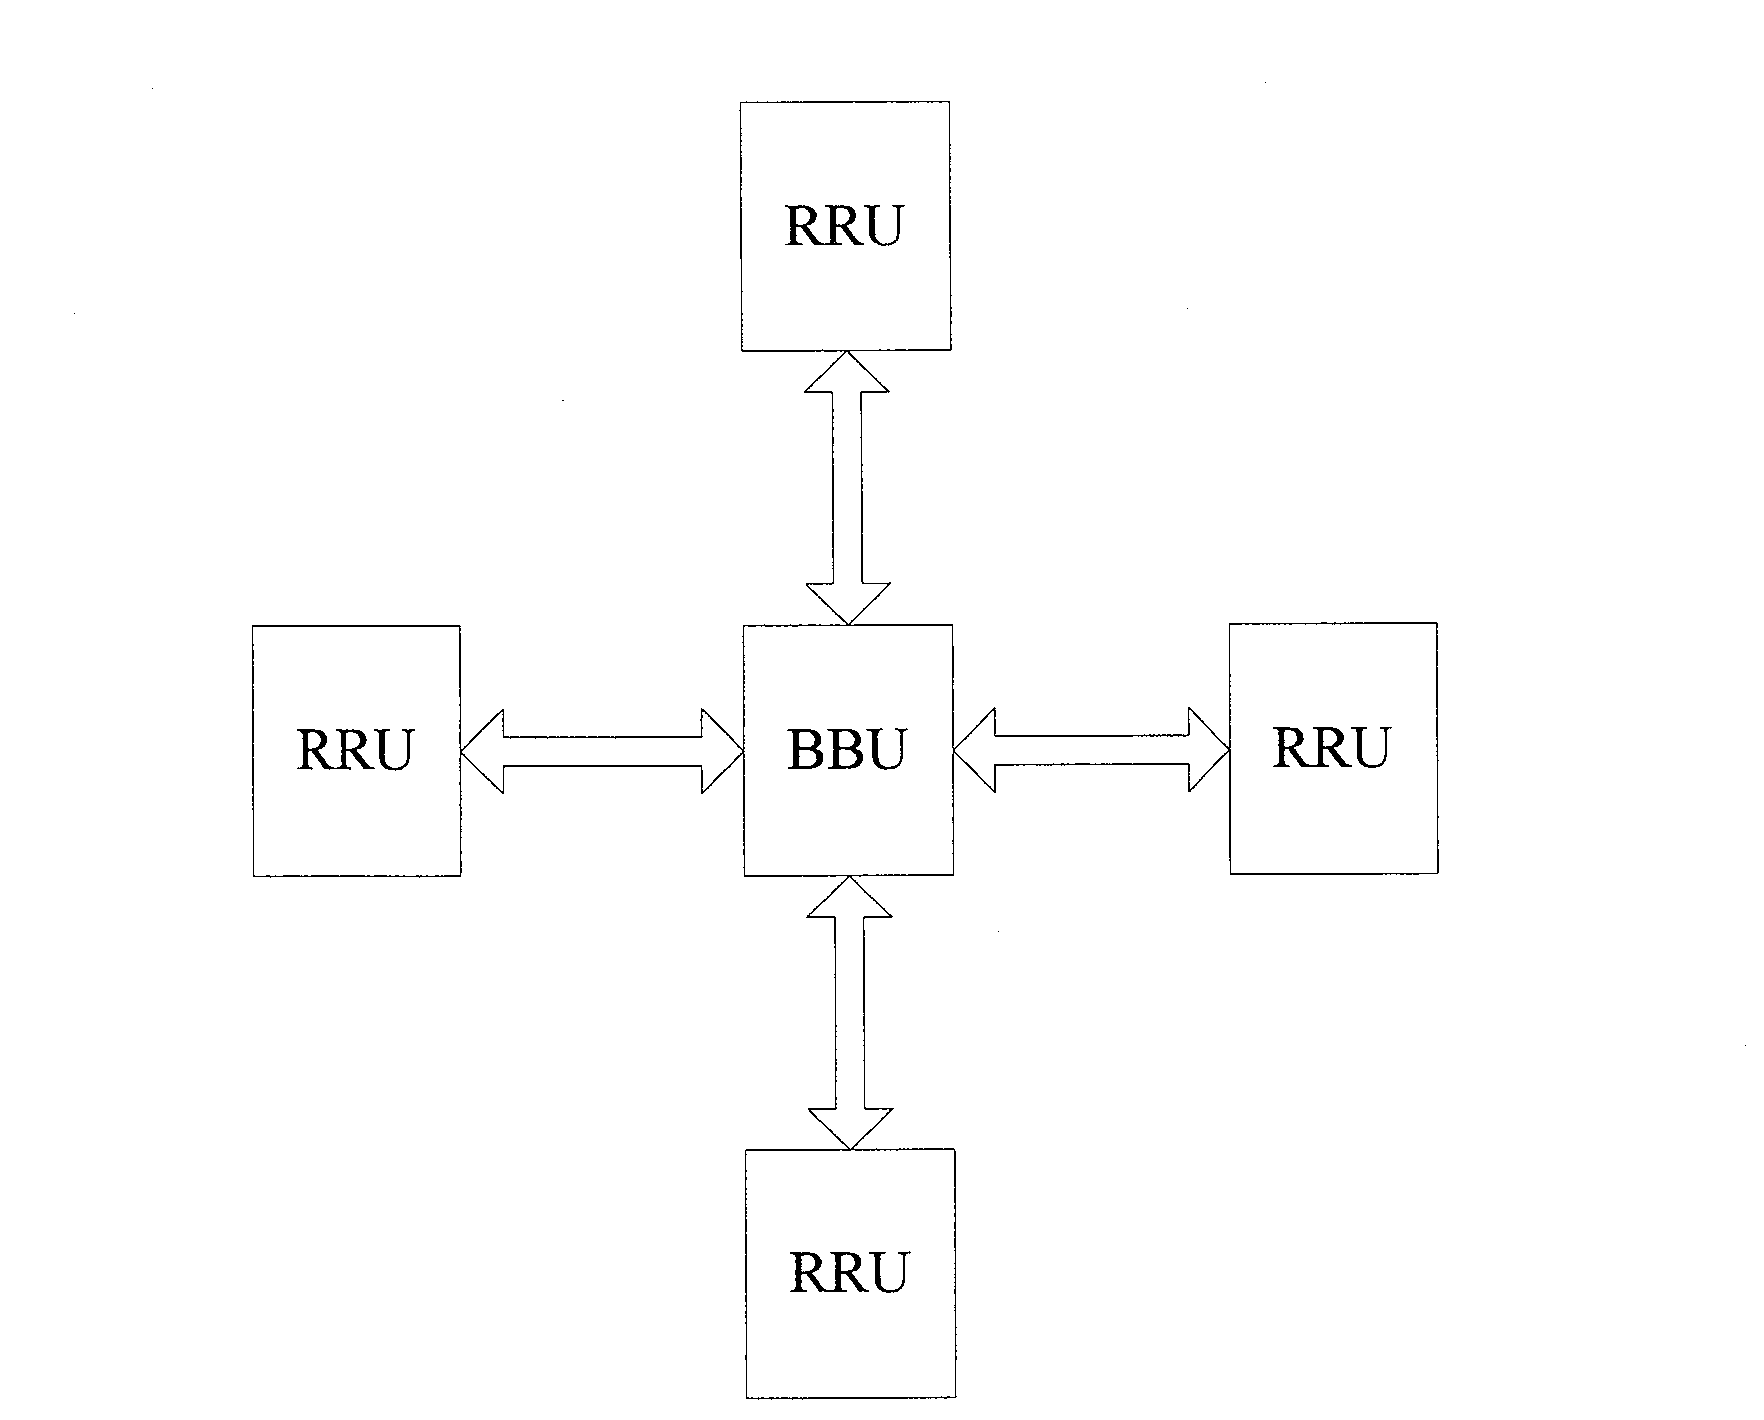 Master-slave relation deterministic method for far-end radio frequency unit in wireless communication system